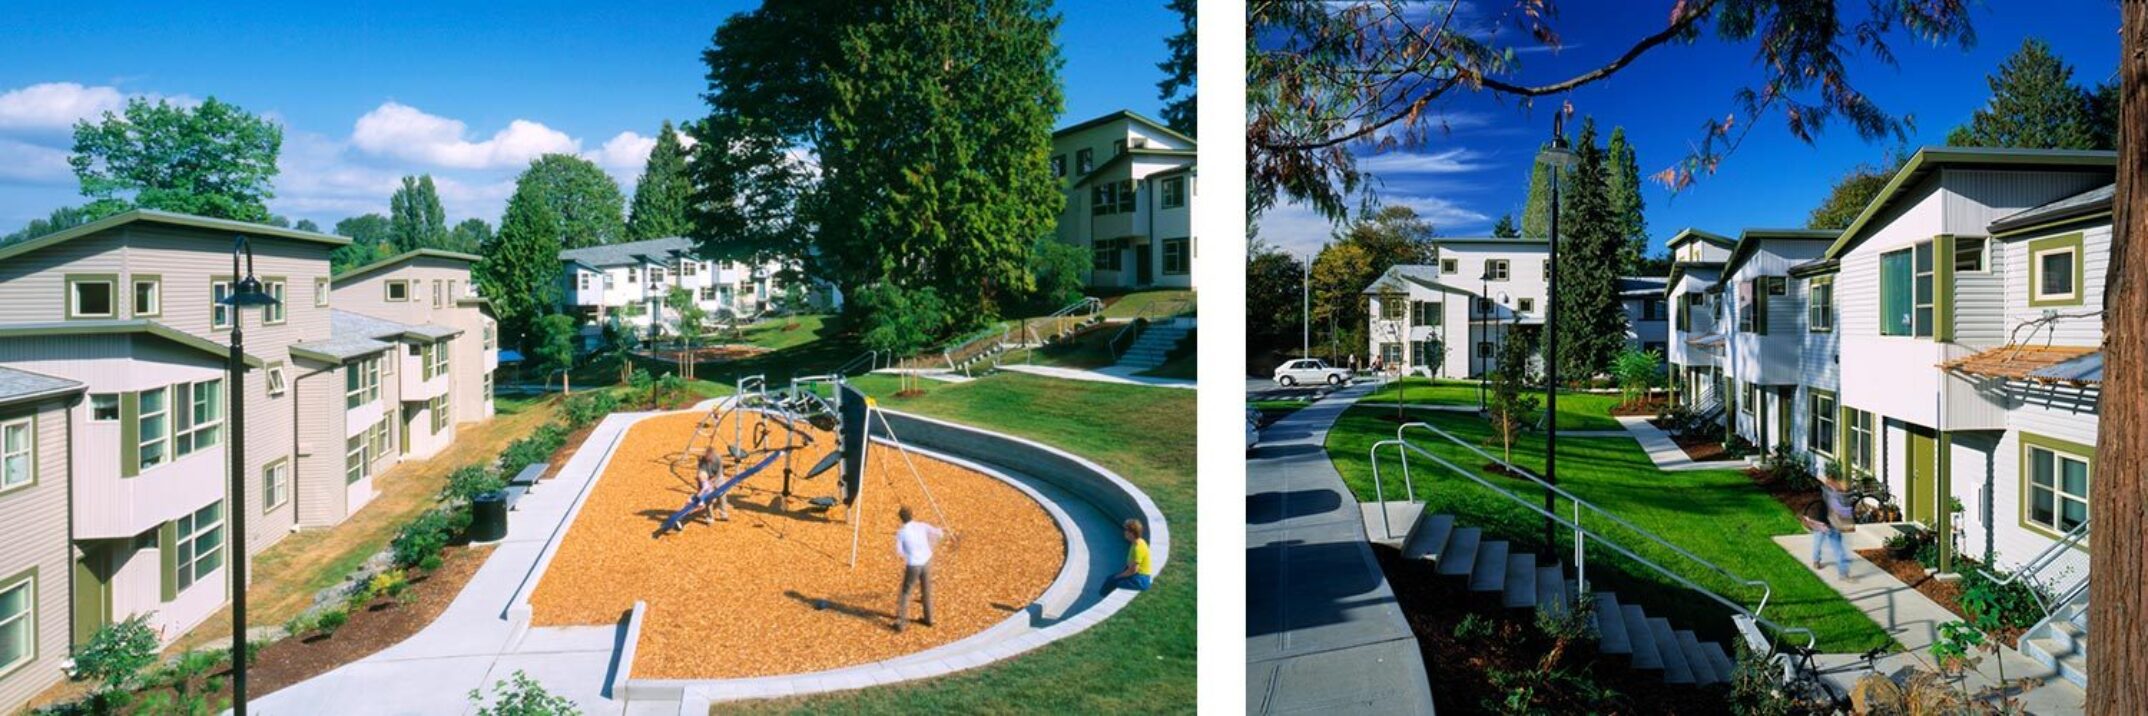 Inner courtyards, abundant green spaces, and a network of bike and pedestrian paths create a family-oriented parklike setting at the University of Washington’s Radford Court Apartments, a 400-unit faculty and graduate family housing community. Radford Court was designed by an NAC employee while at a previous firm.